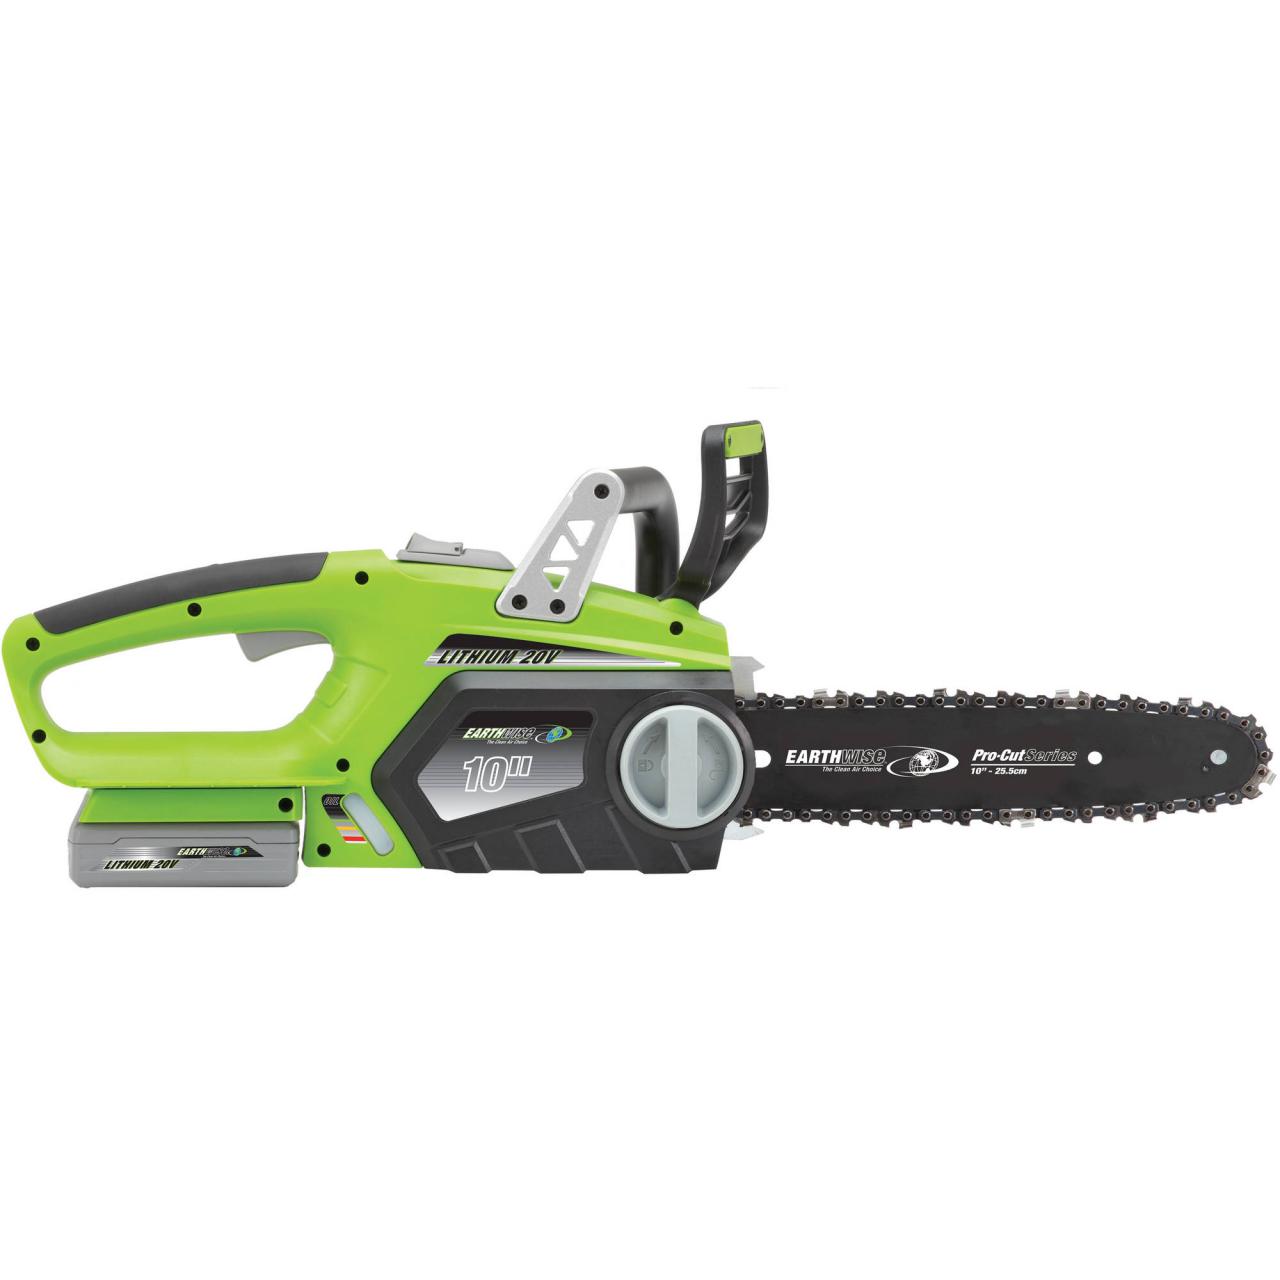 Earthwise LCS31010 Cordless Lithium Ion Chainsaw Review - Chainsaw Crazy |  Best Chainsaws